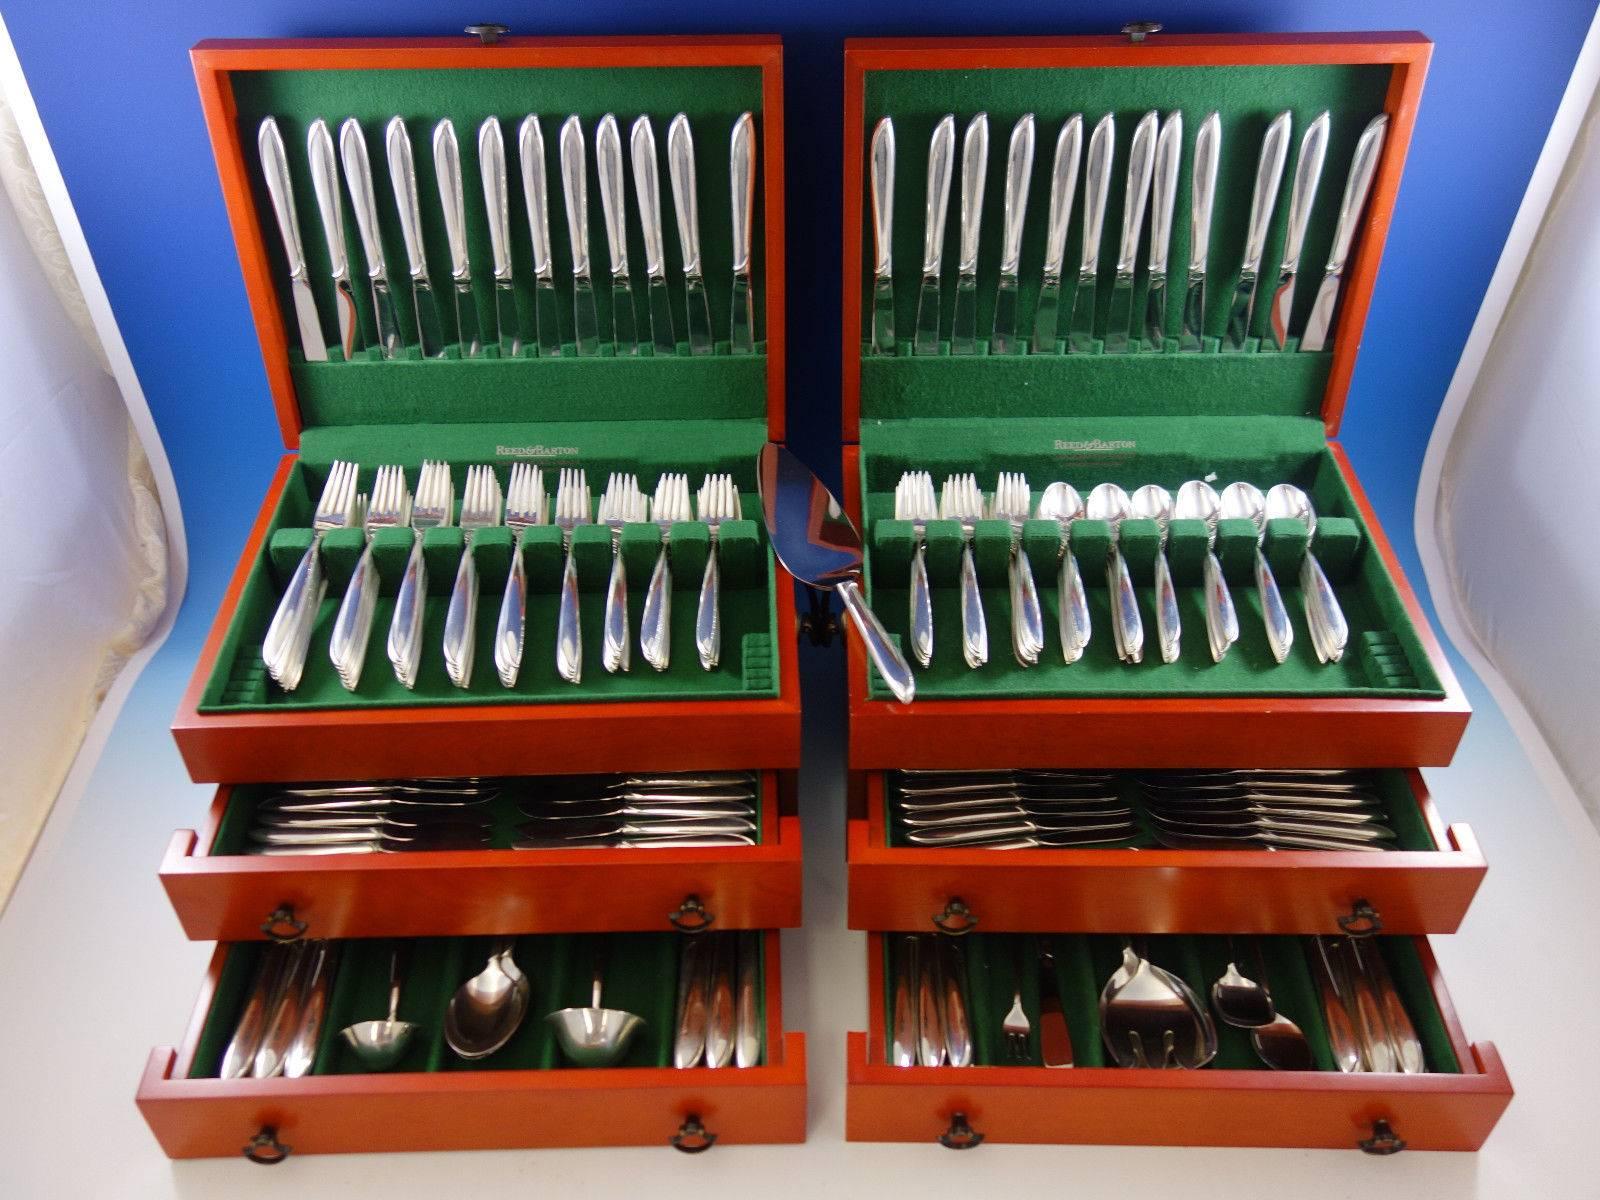 Silver Rhythm by International Sterling Silver Flatware set - 251 pieces. This large set for 48 includes: 
48 Knives, 9 1/4